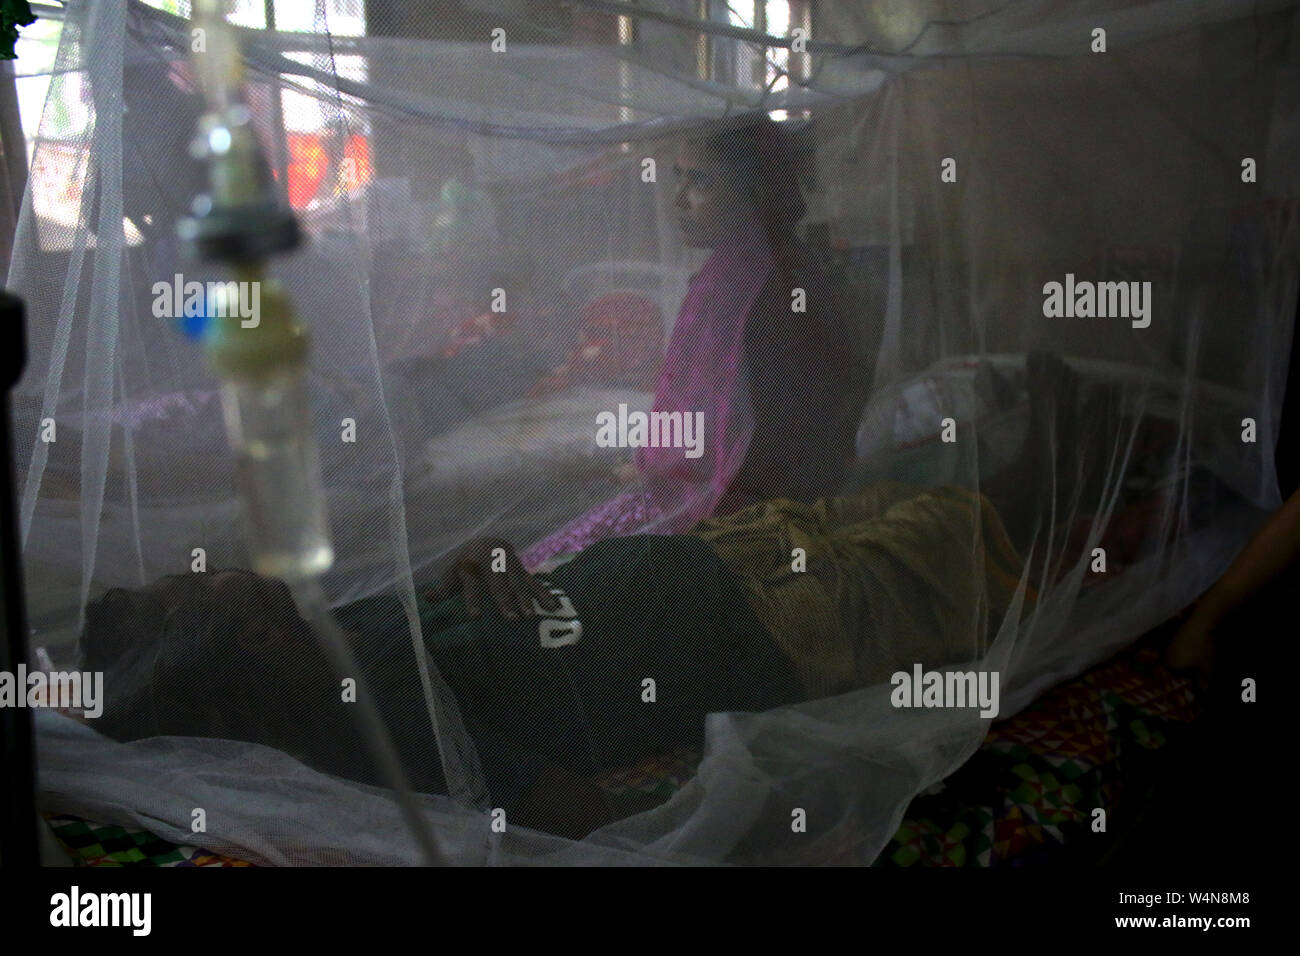 To help fight spread of Dengue fever, mosquito nets have been put up in a ward at the city's Shaheed Suhrawardy Medical Hospital.Cases of Dengue infections have been on the rise, particularly in the capital since March this year. Stock Photo